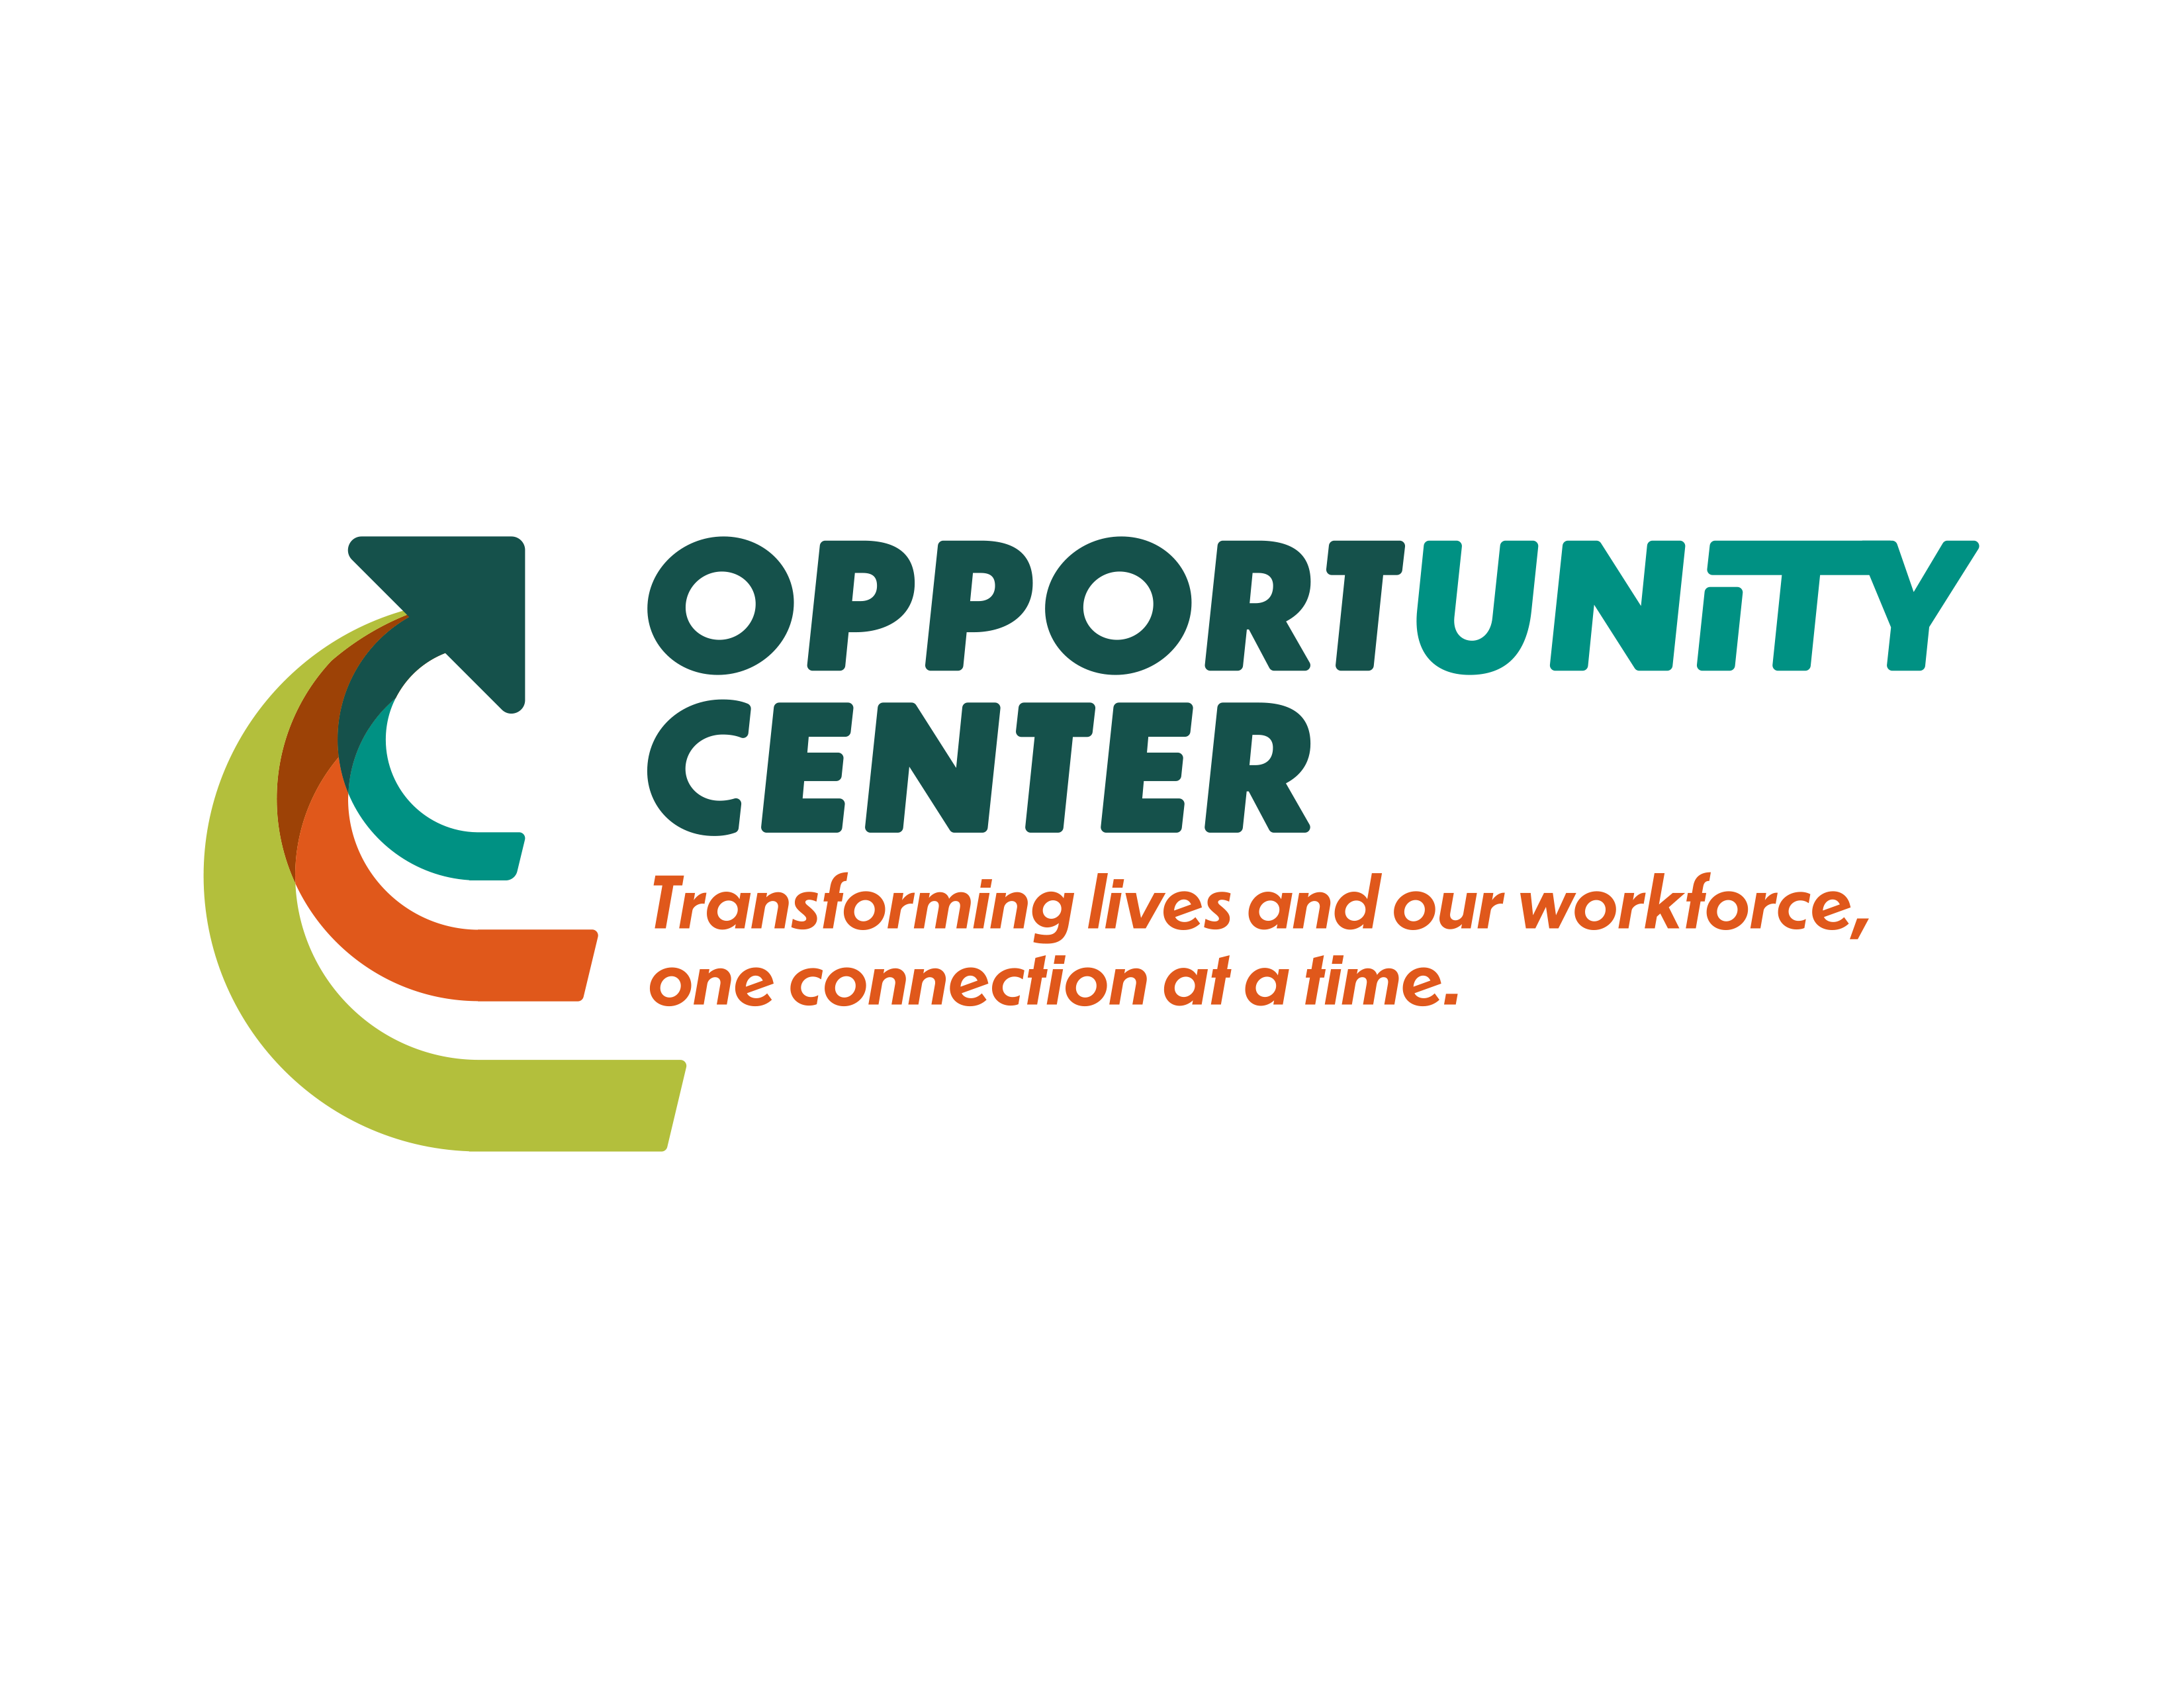 Opportunity Center logo with the words "Transforming lives and our workforce, one connection at a time.